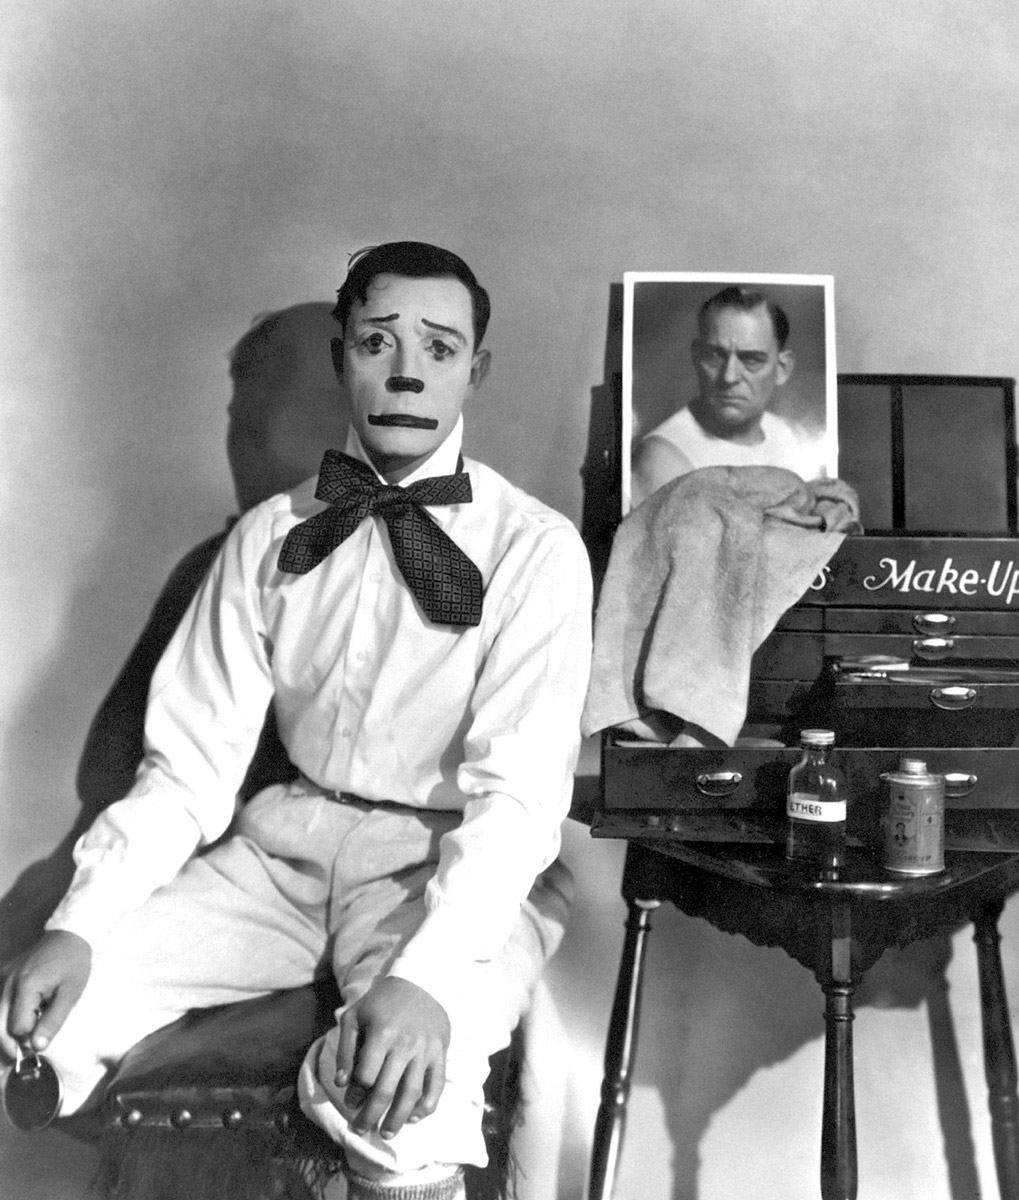 Busting the Buster Myth: To Buster Keaton, Comedy was a Laughing Matter, by Simply Charly